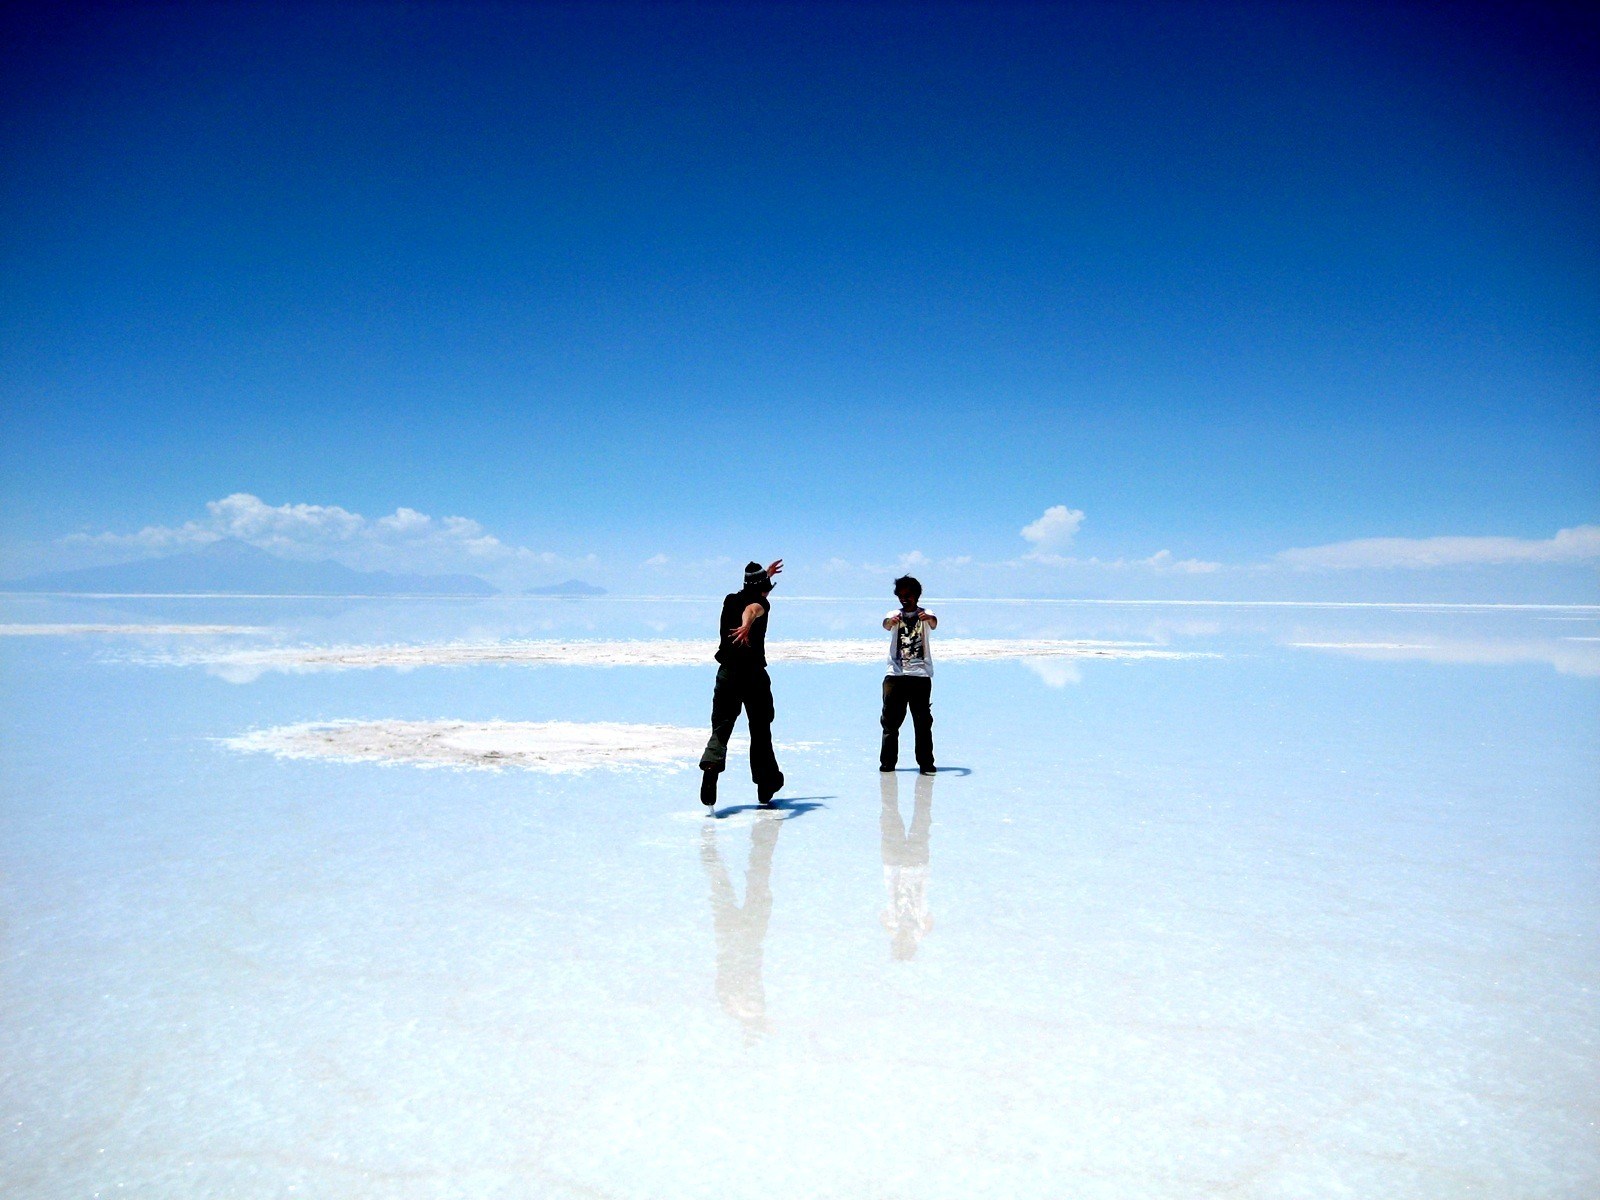 Salar-de-Uyuni-Bolivia Top 10 Most Beautiful Places in the World to Visit in 2022